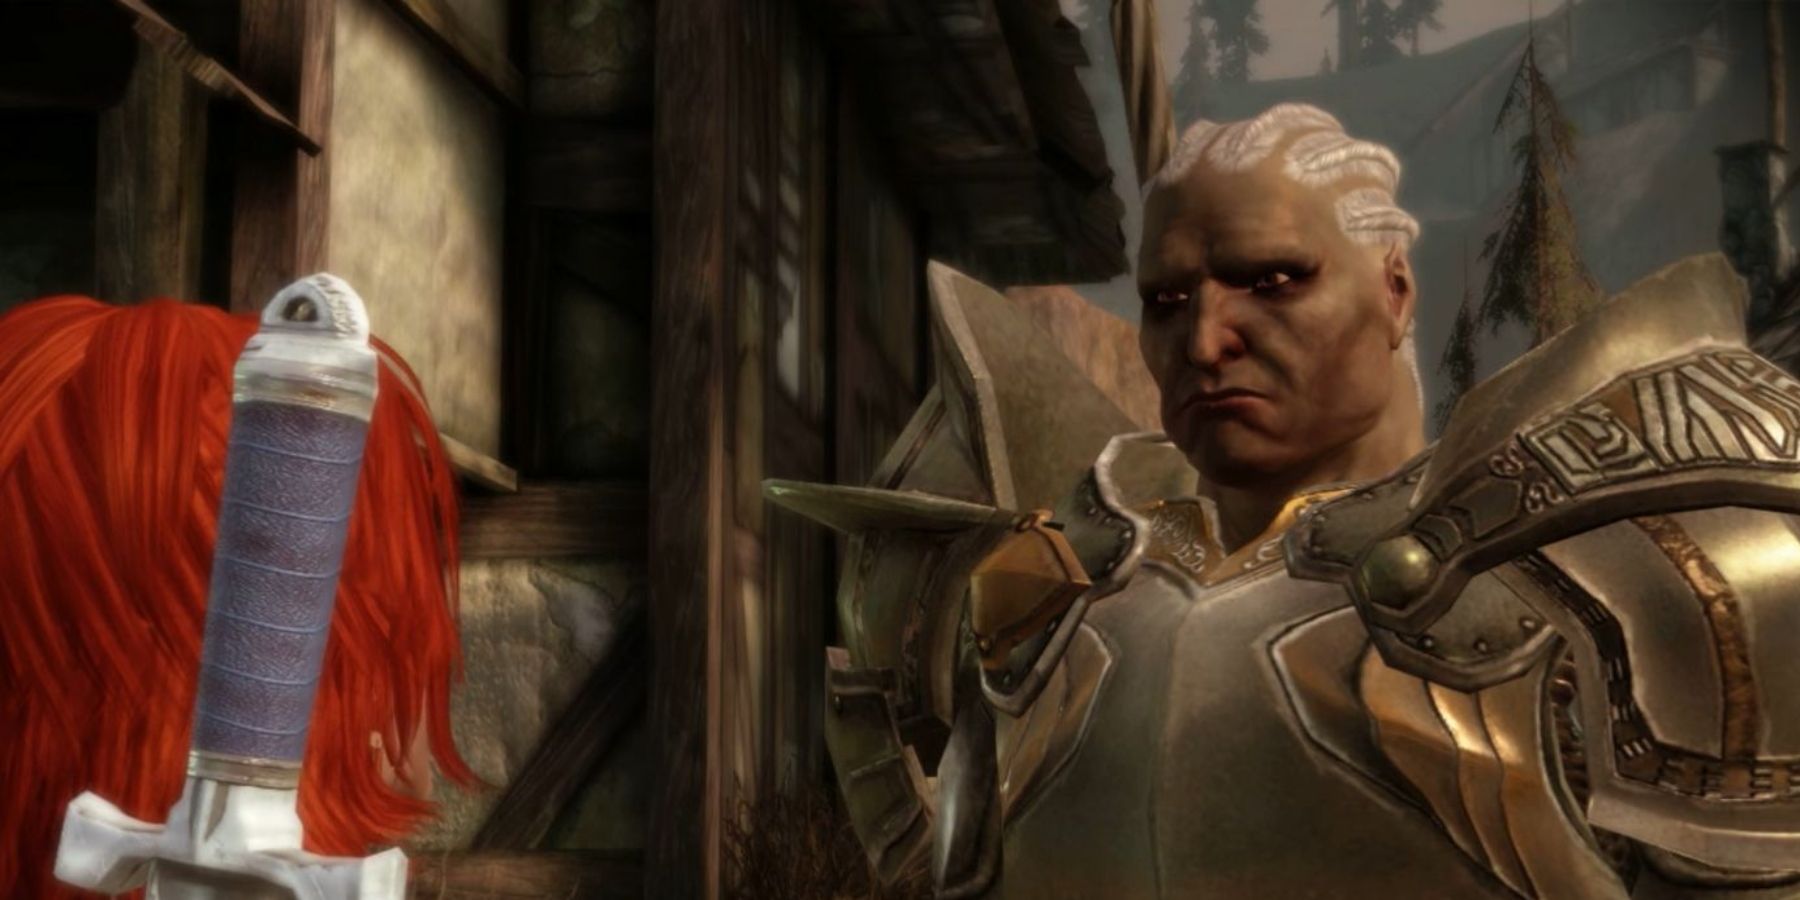 Sten staring at the player in Dragon Age: Origins